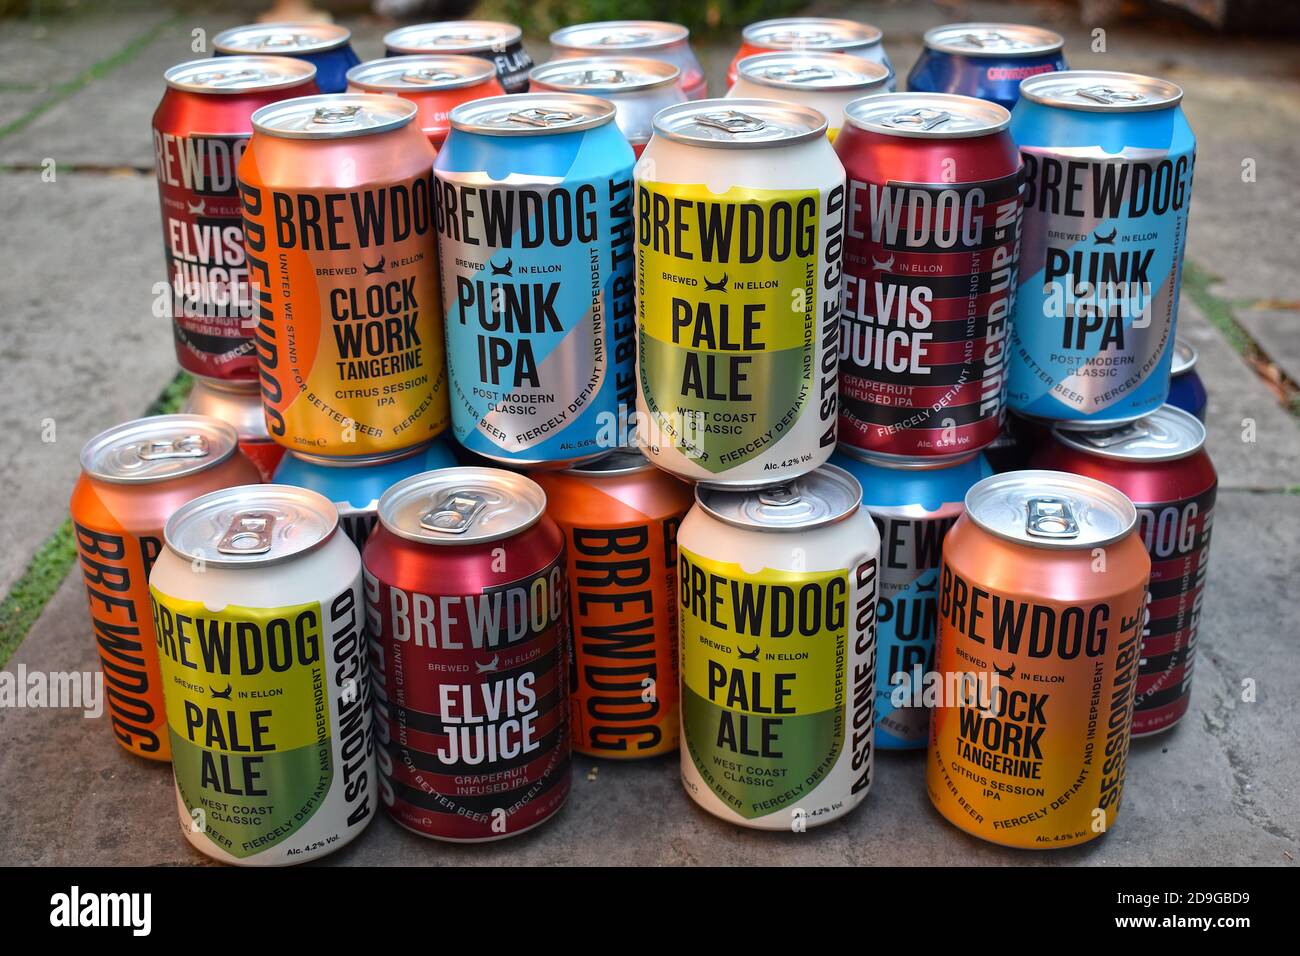 BrewDog produces variety of ales lagers It is Scottish brewery and pub chain based in Ellon Scotland Punk IPA is the top selling craft beer in England Stock Photo